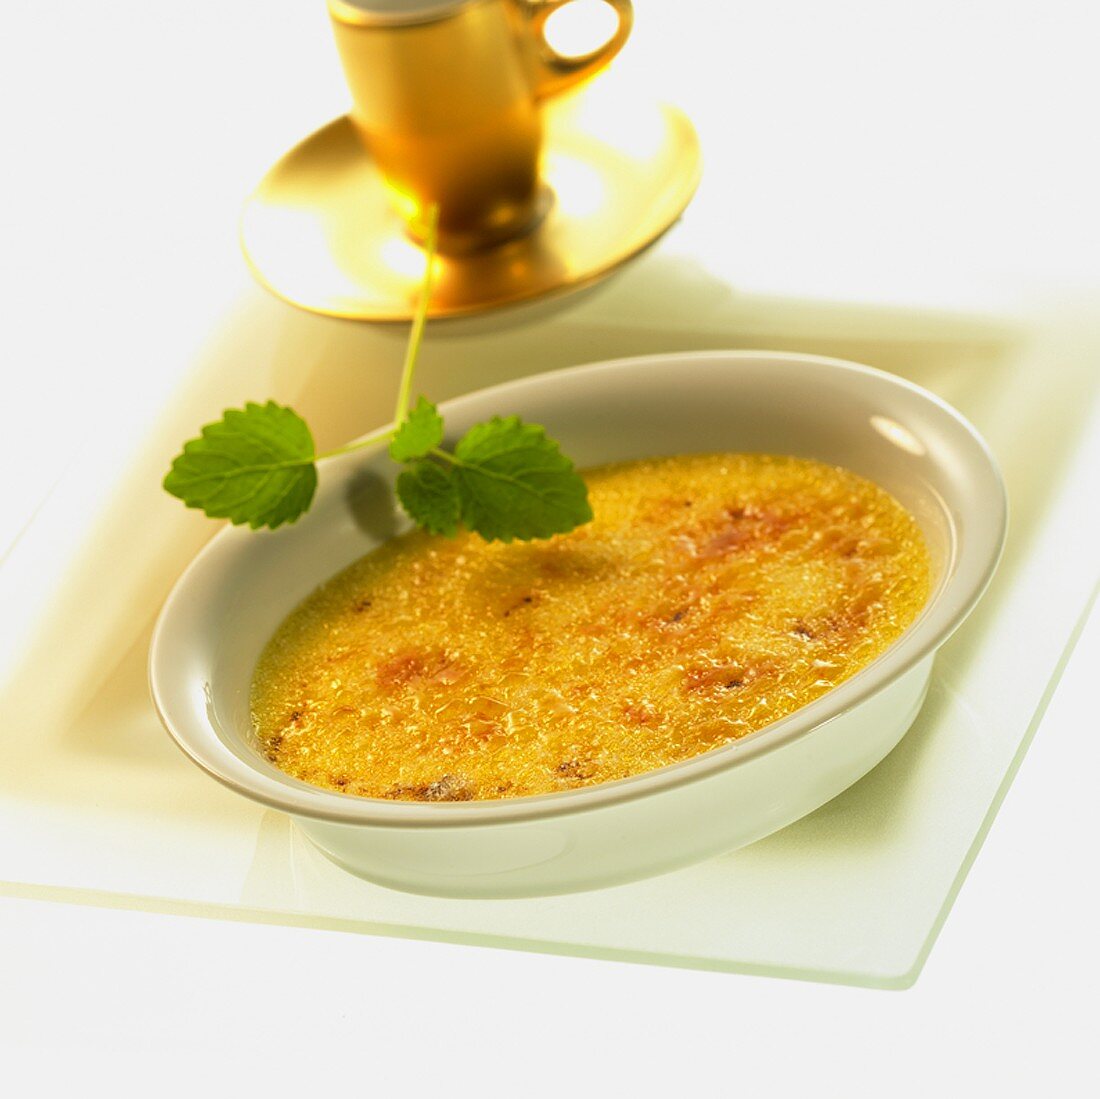 Crème brulee in white bowl